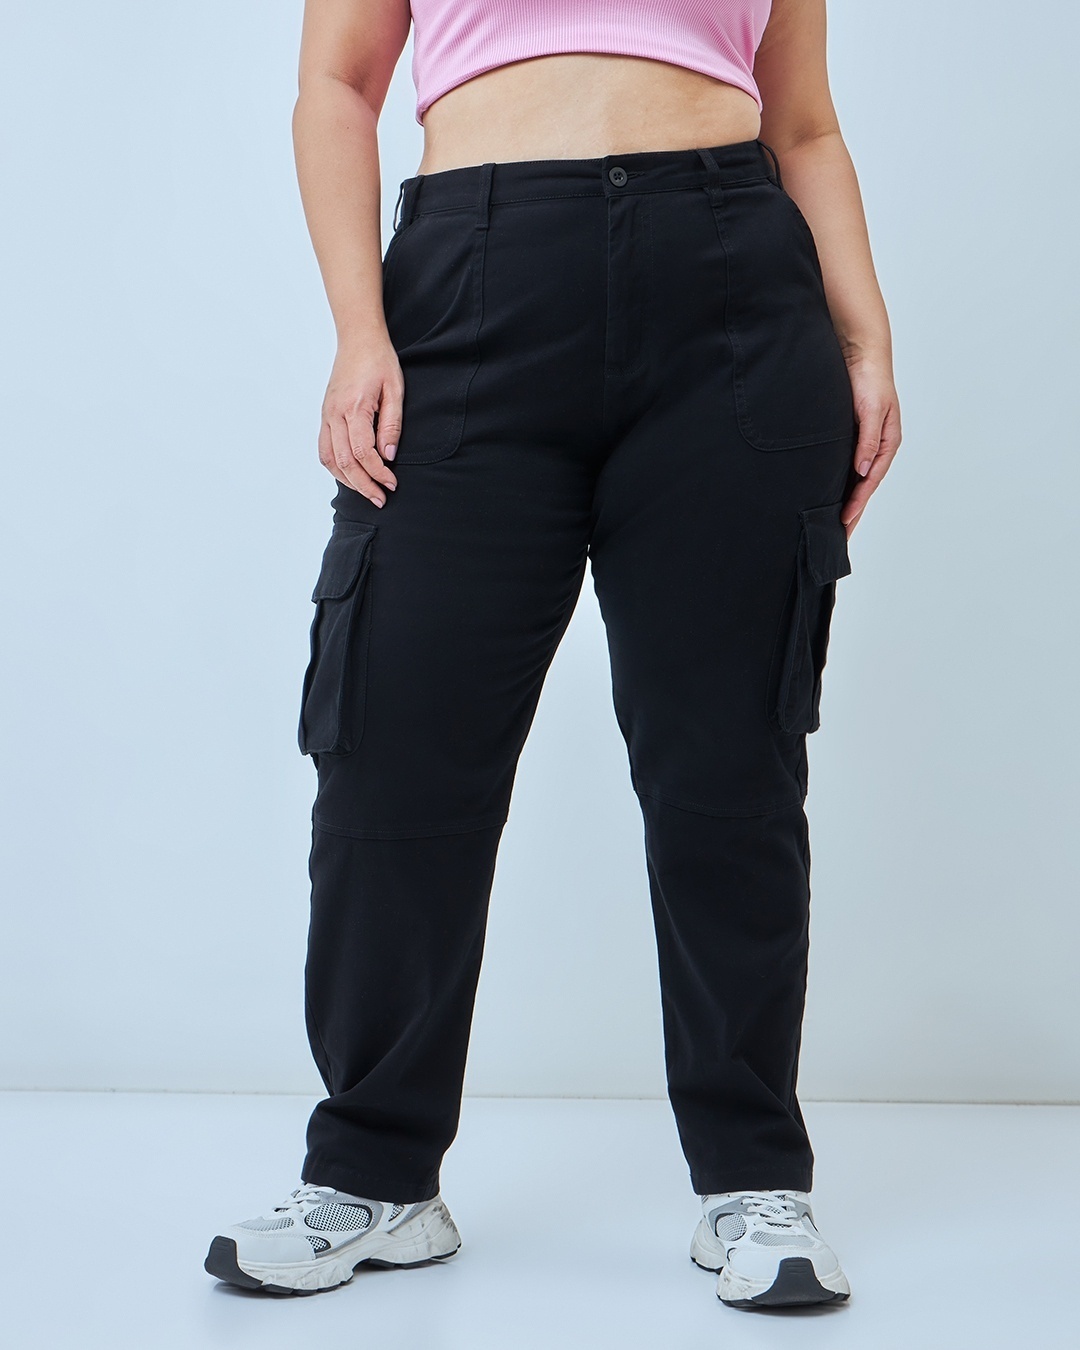 Black Cargo Pants Women Pants Chain Wide Leg Goth Hippie Sweatpants - China  Wmen's Pants and Wmen's Trousers price | Made-in-China.com